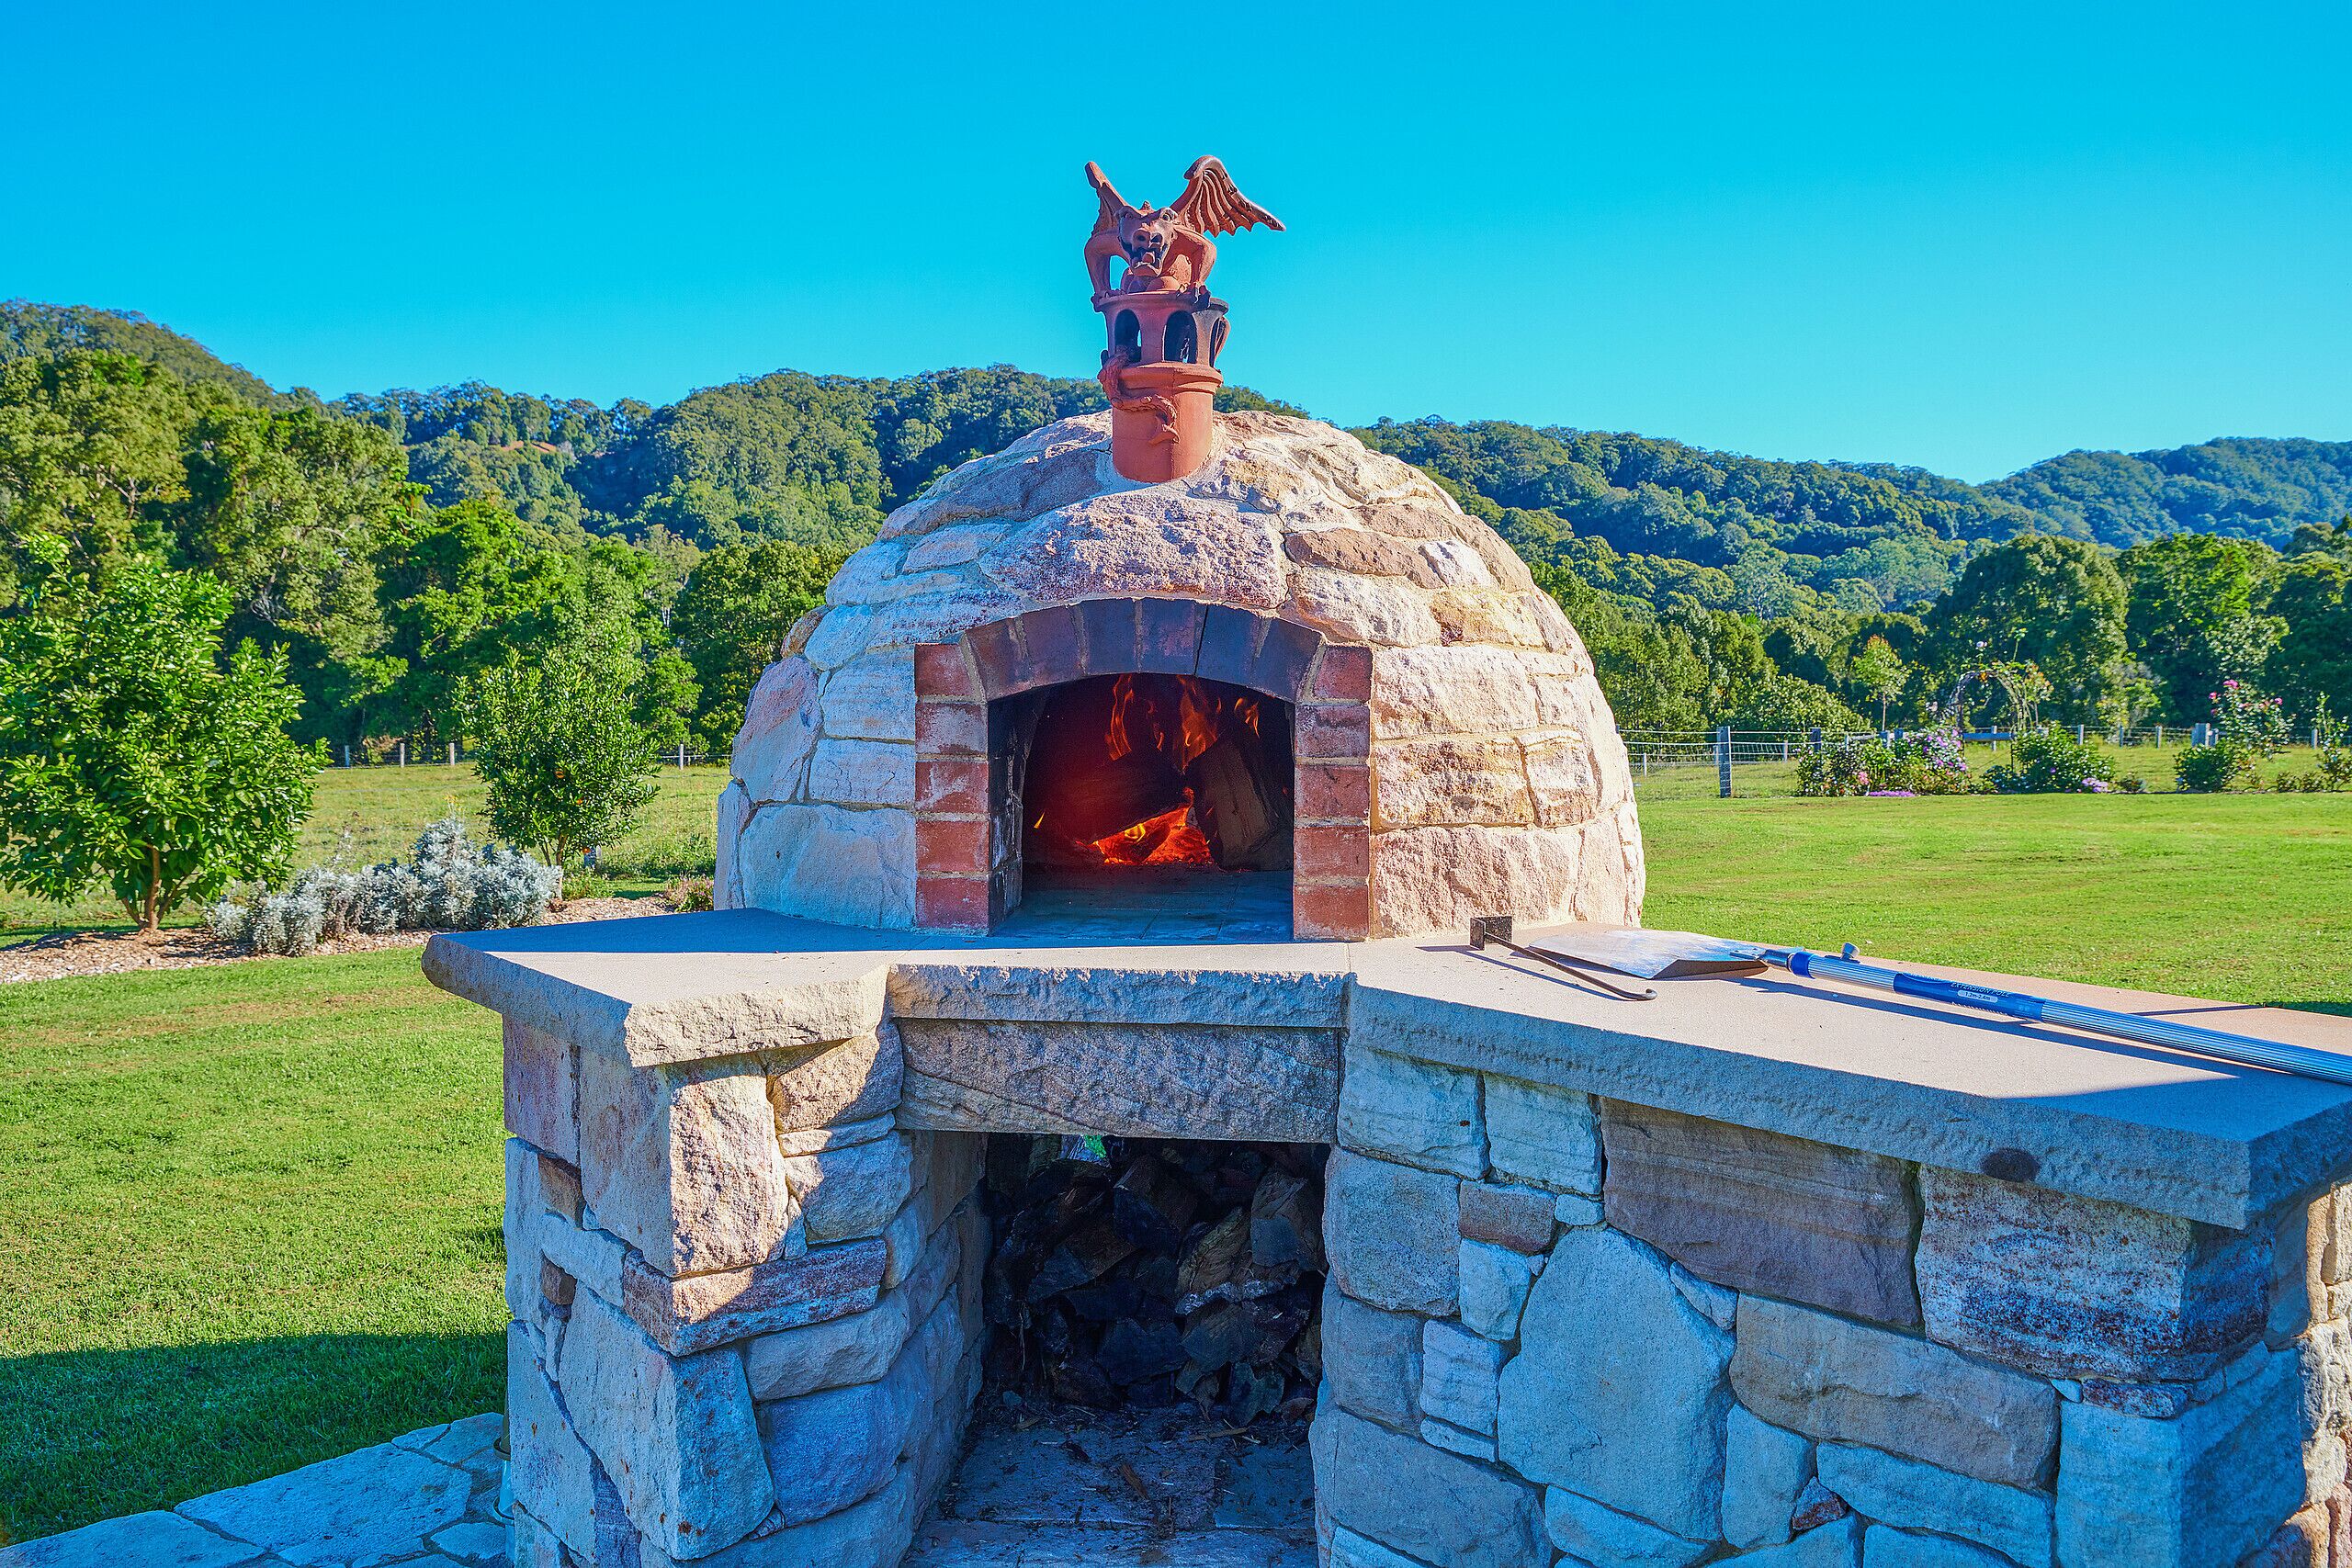 Self Contained Farm Retreat, Spa, Wood Fired Pizza Oven, Fire Pit, BBQ